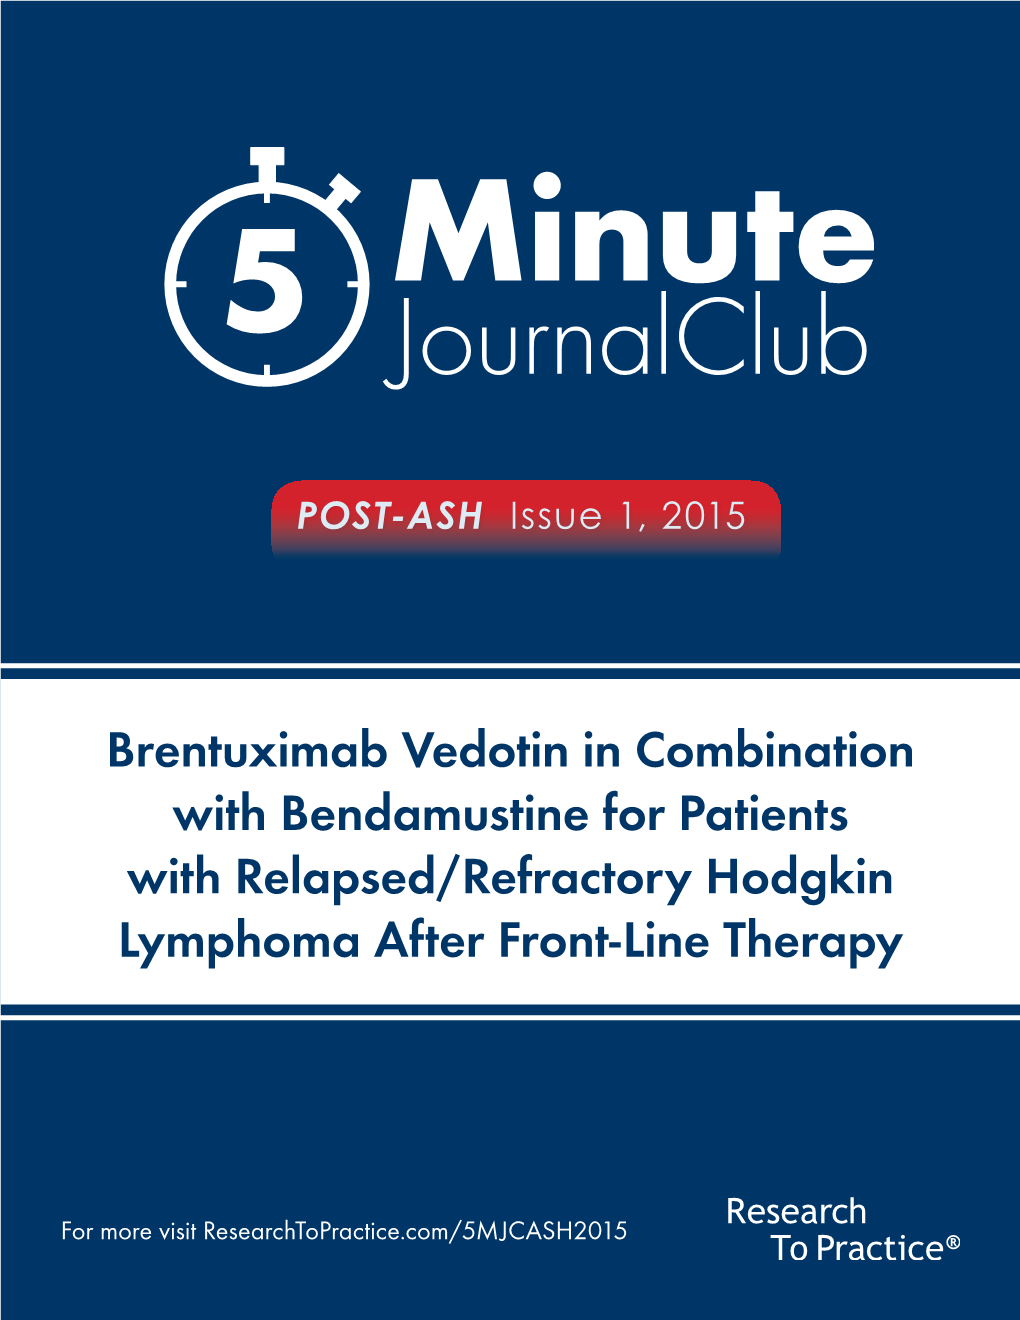 Brentuximab Vedotin in Combination with Bendamustine for Patients with Relapsed/Refractory Hodgkin Lymphoma After Front-Line Therapy